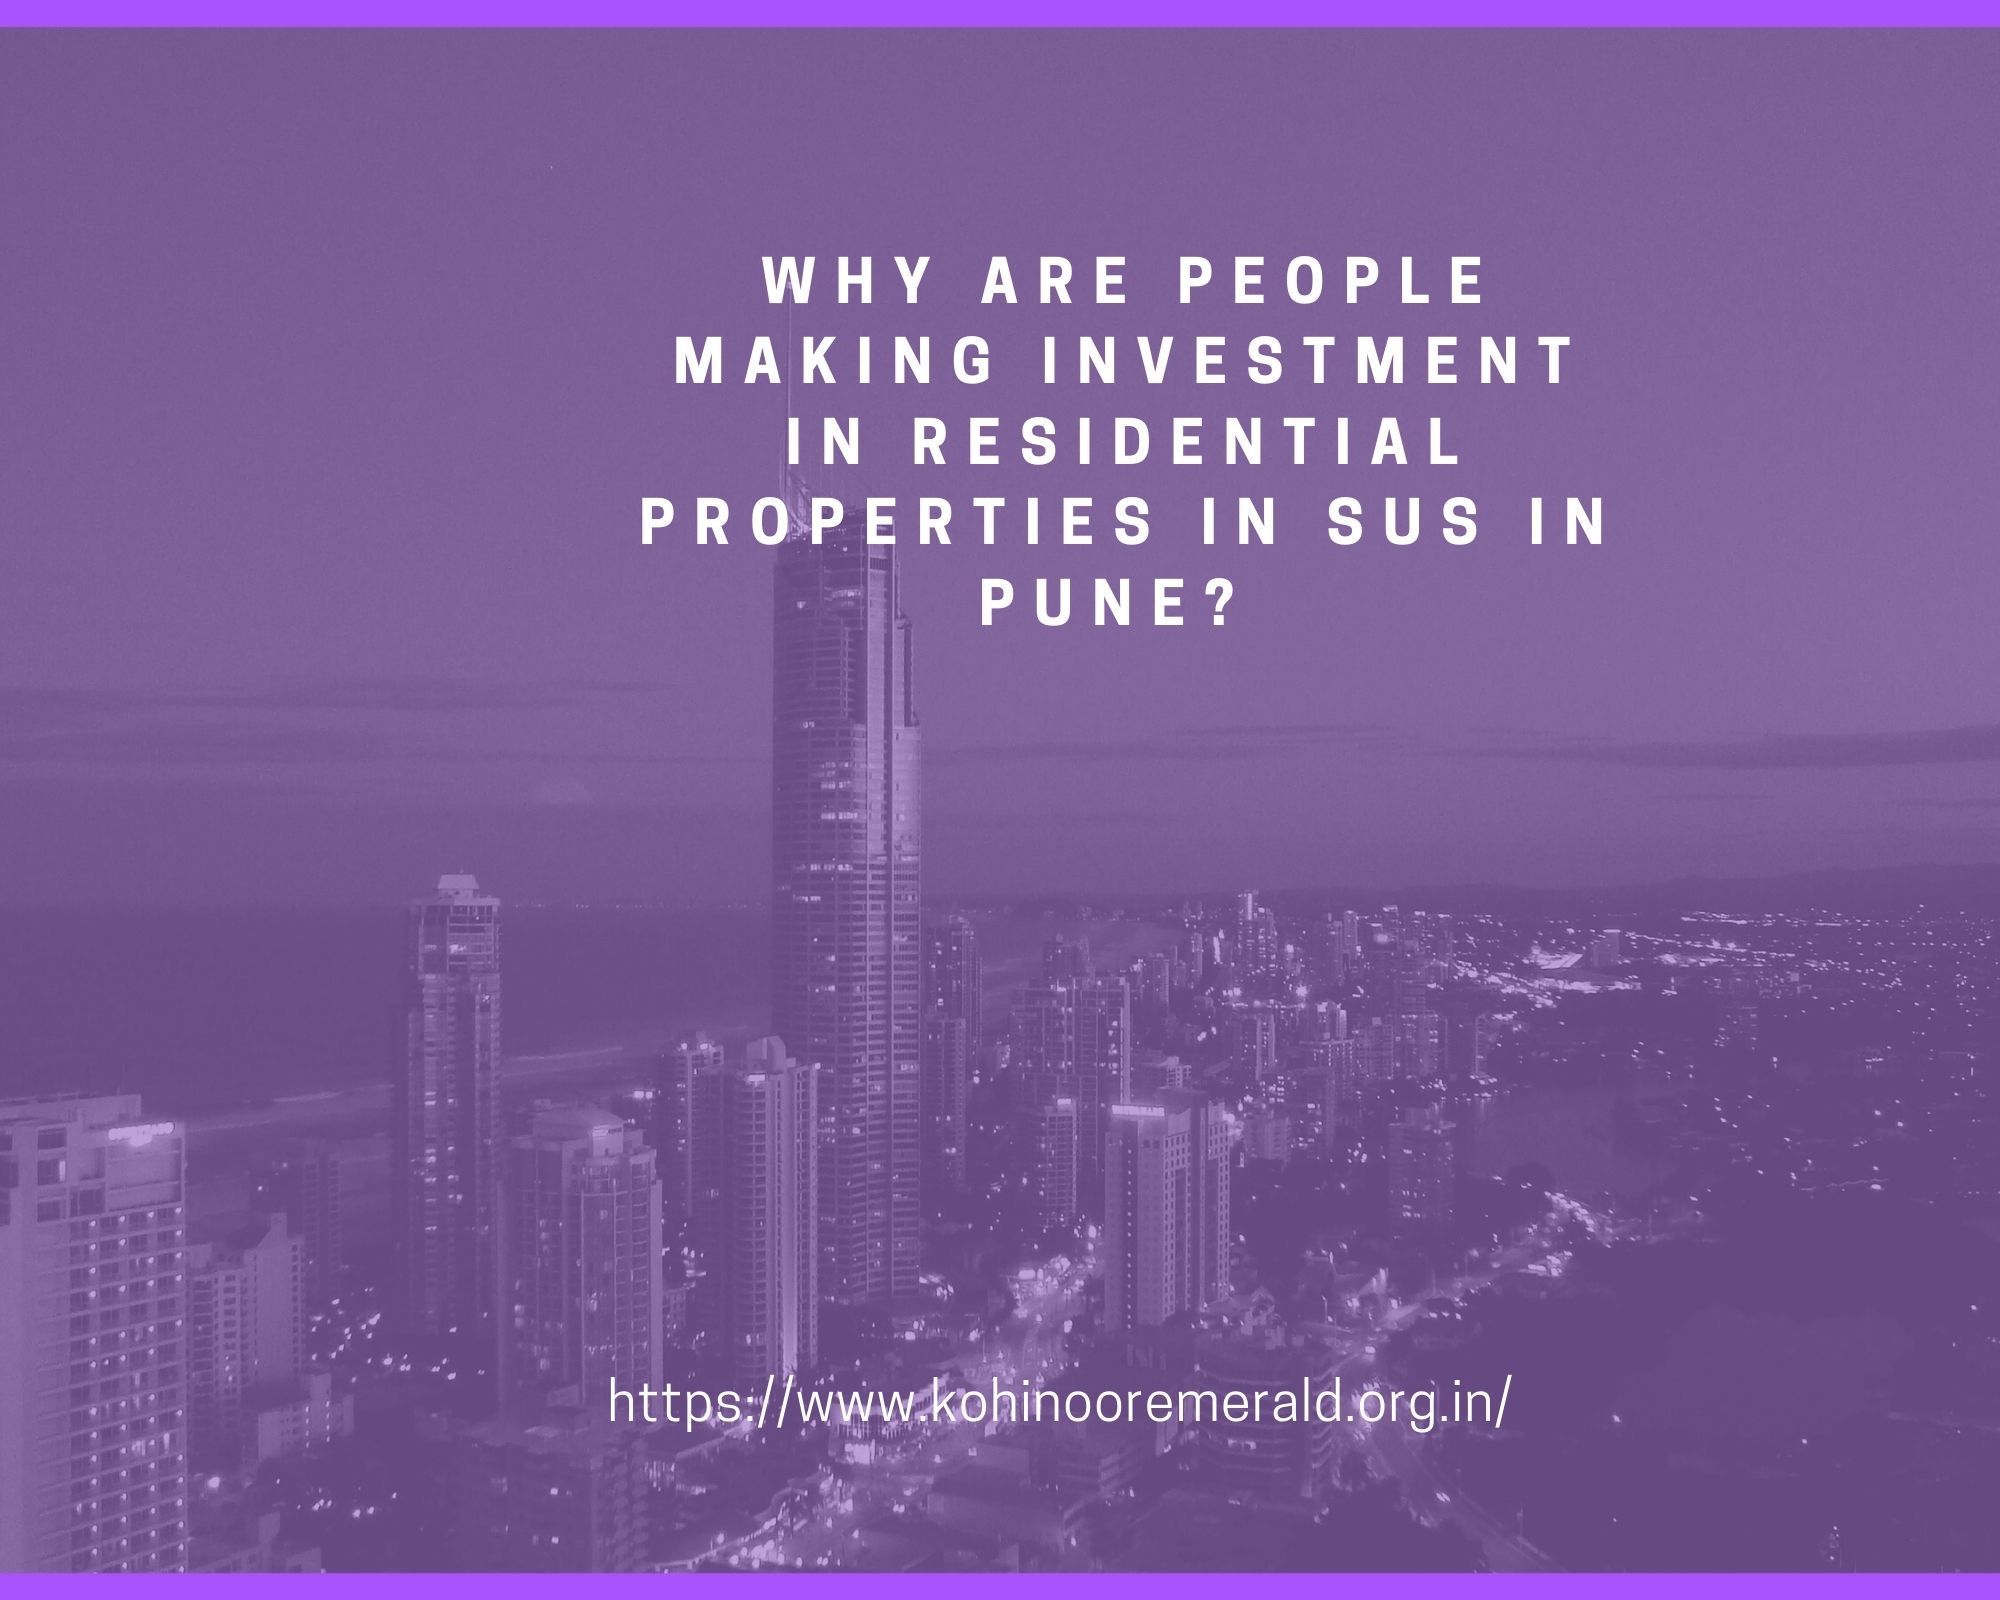 Why are people making investment in residential properties in Sus in Pune?